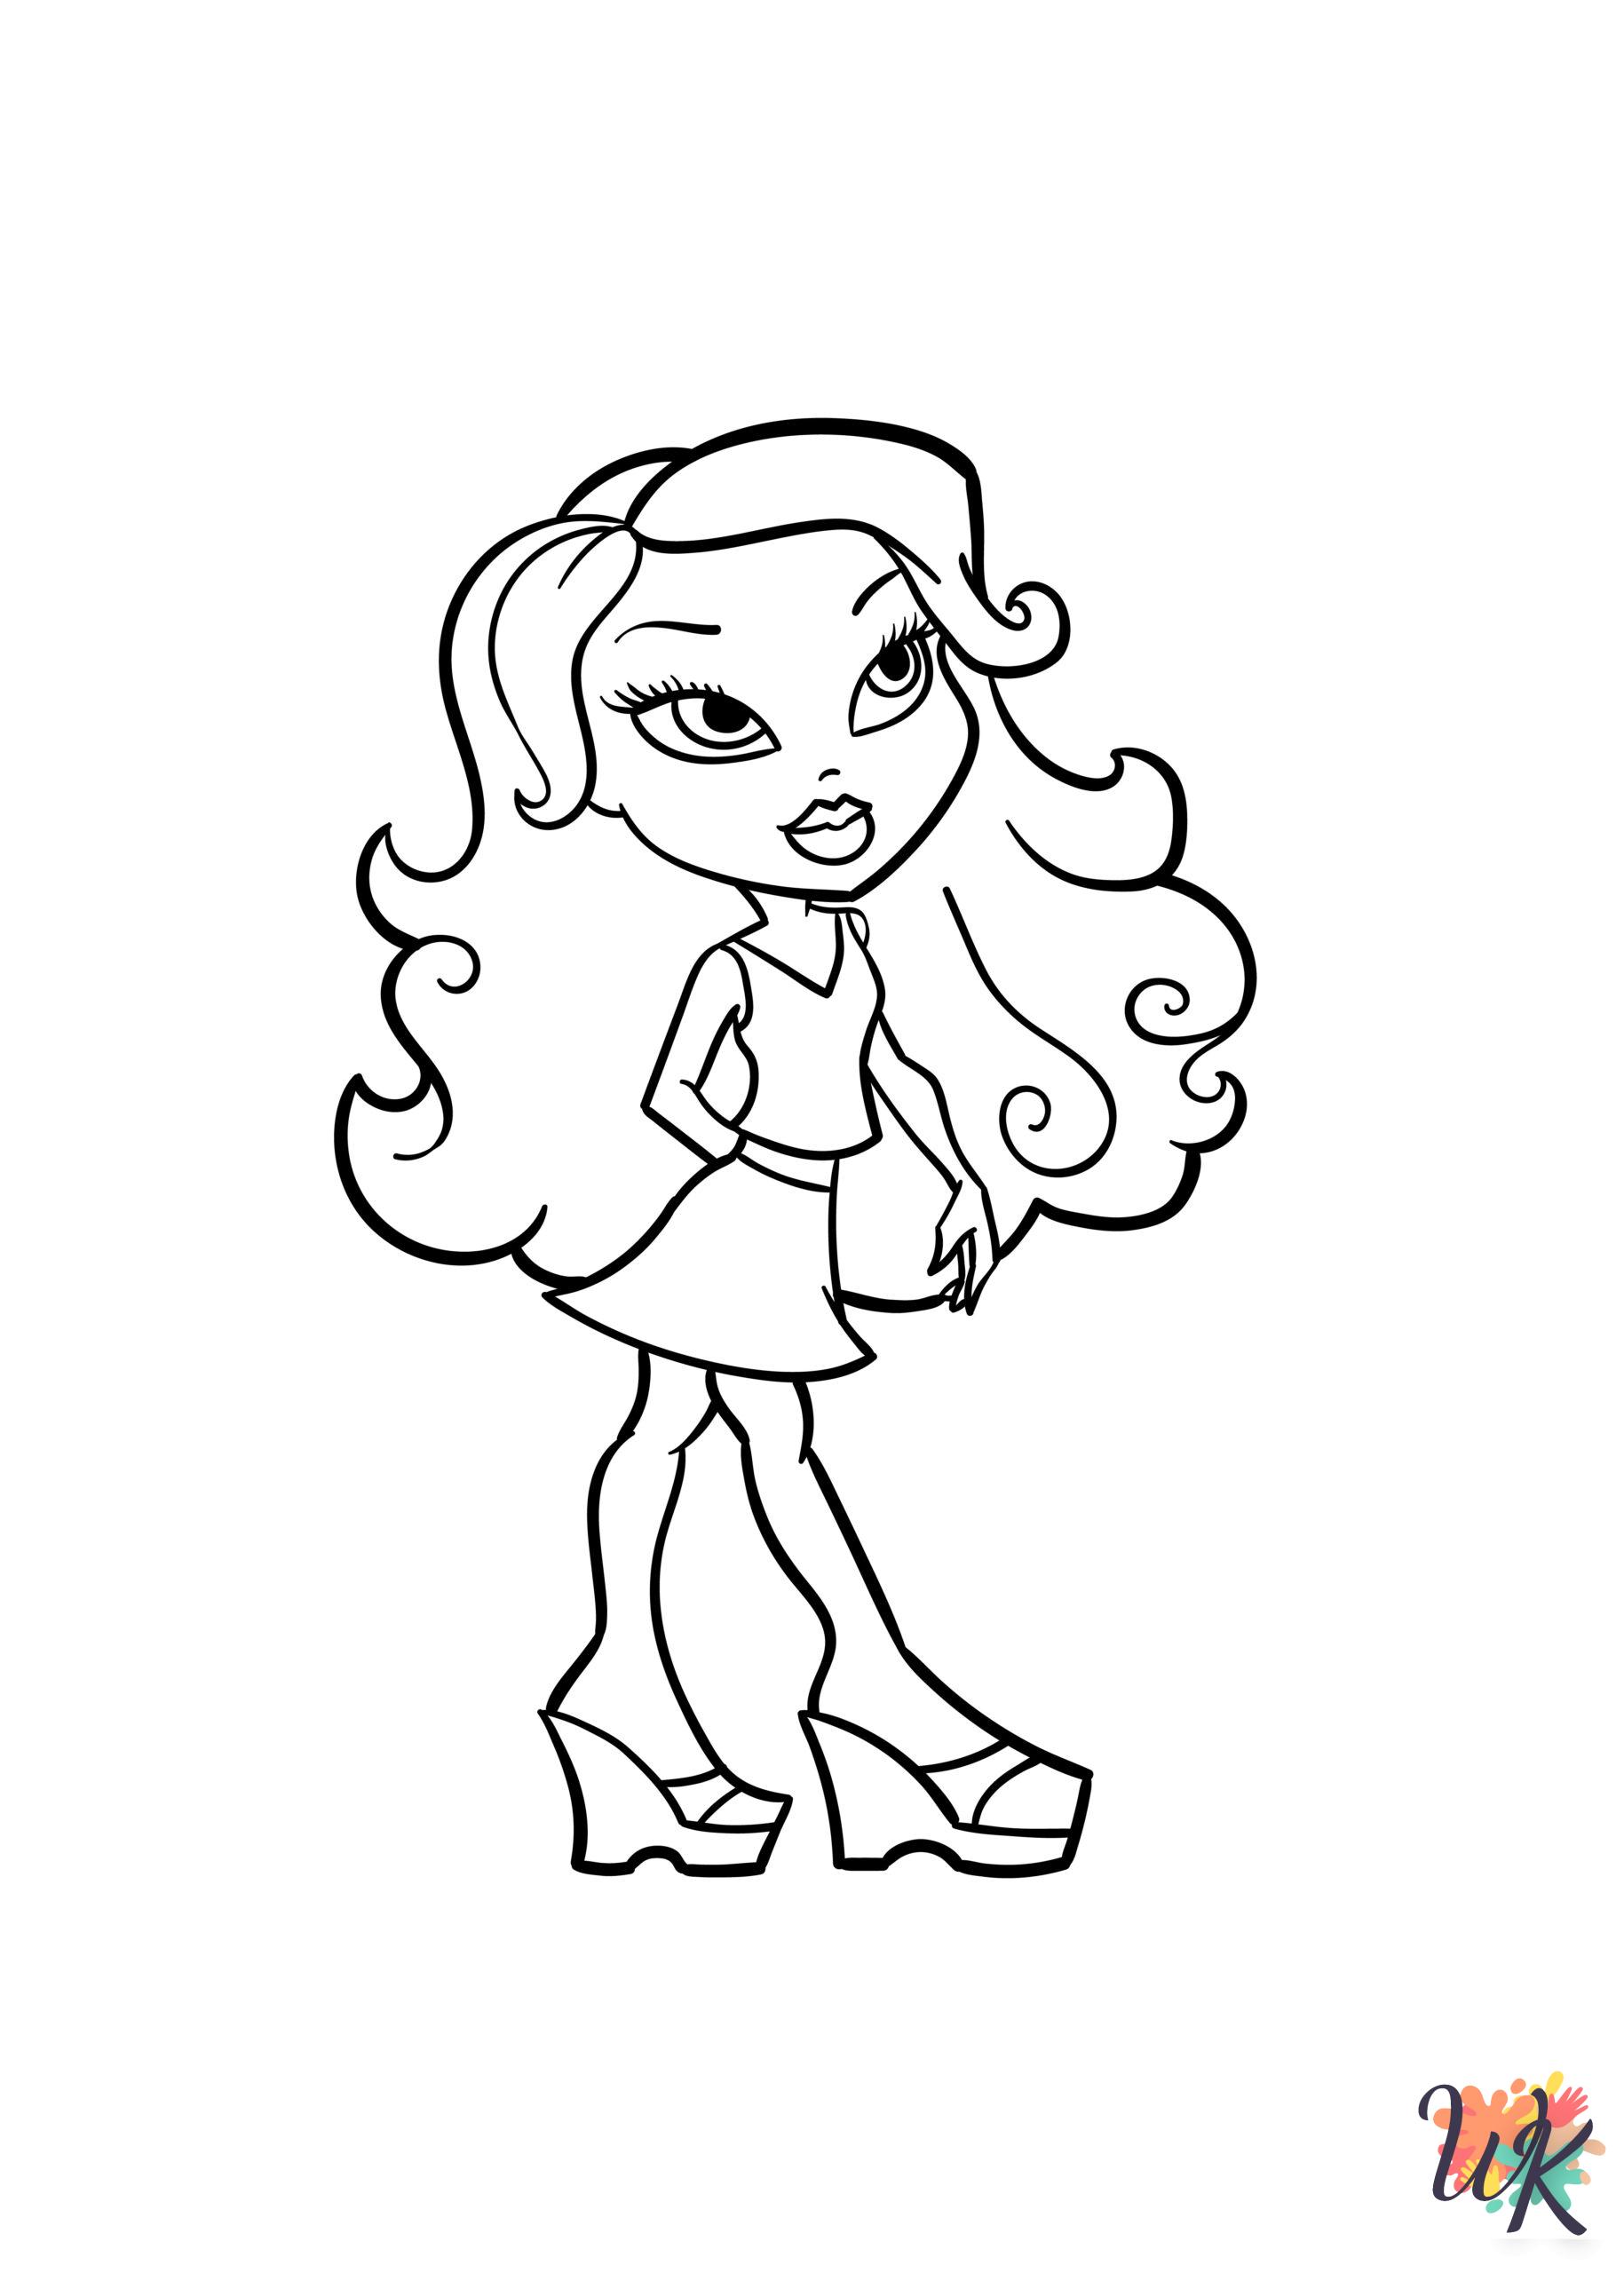 Bratz coloring pages for adults pdf